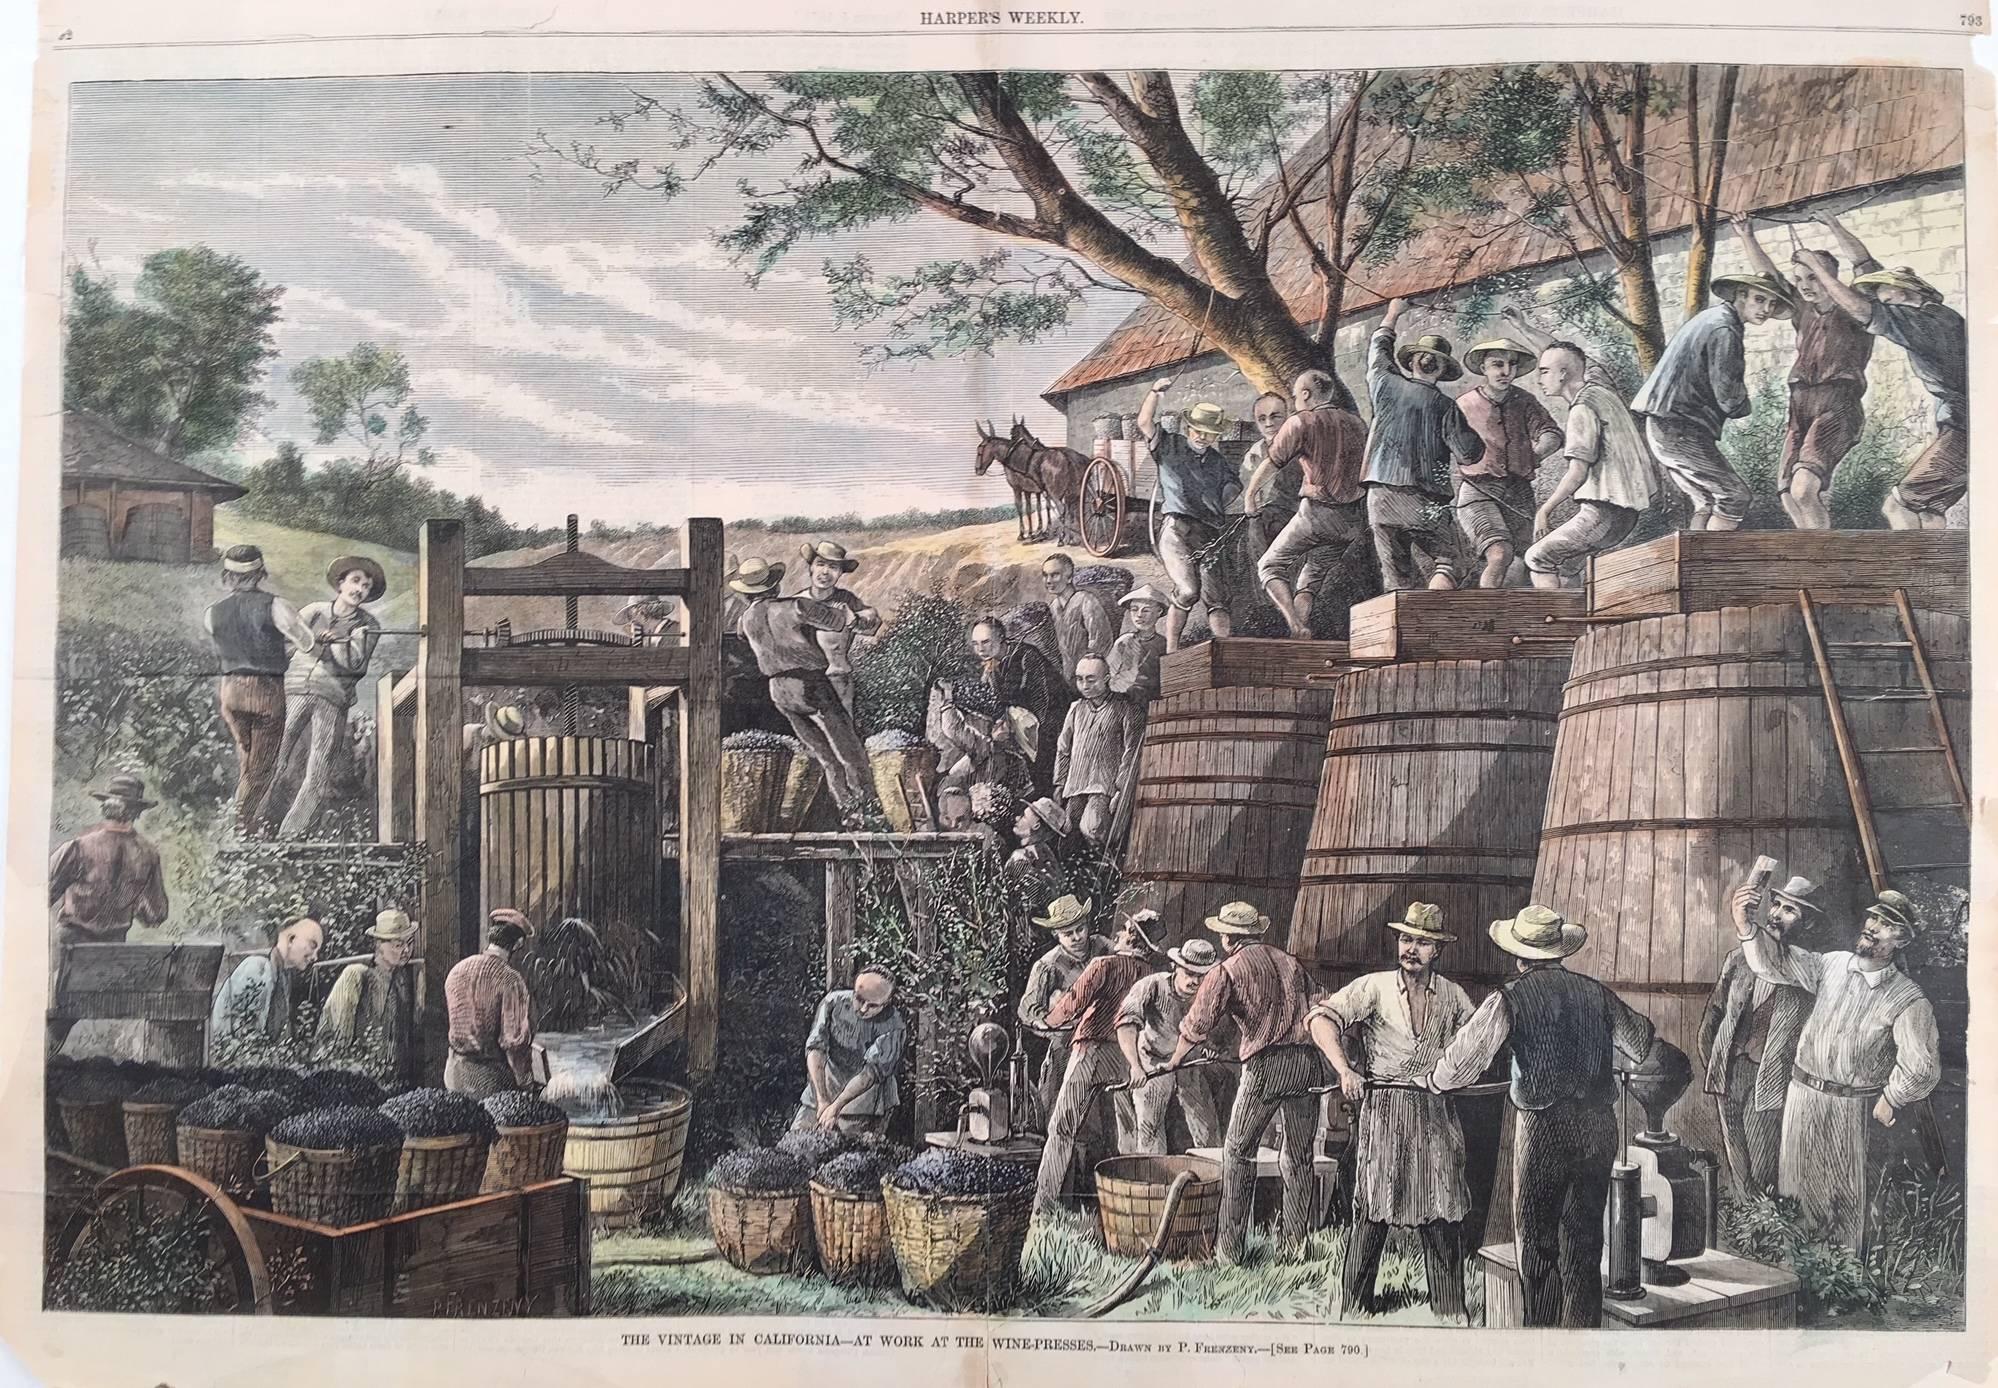 Paul Frenzeny Landscape Print - "The Vintage In California—At Work At The Wine-Presses"